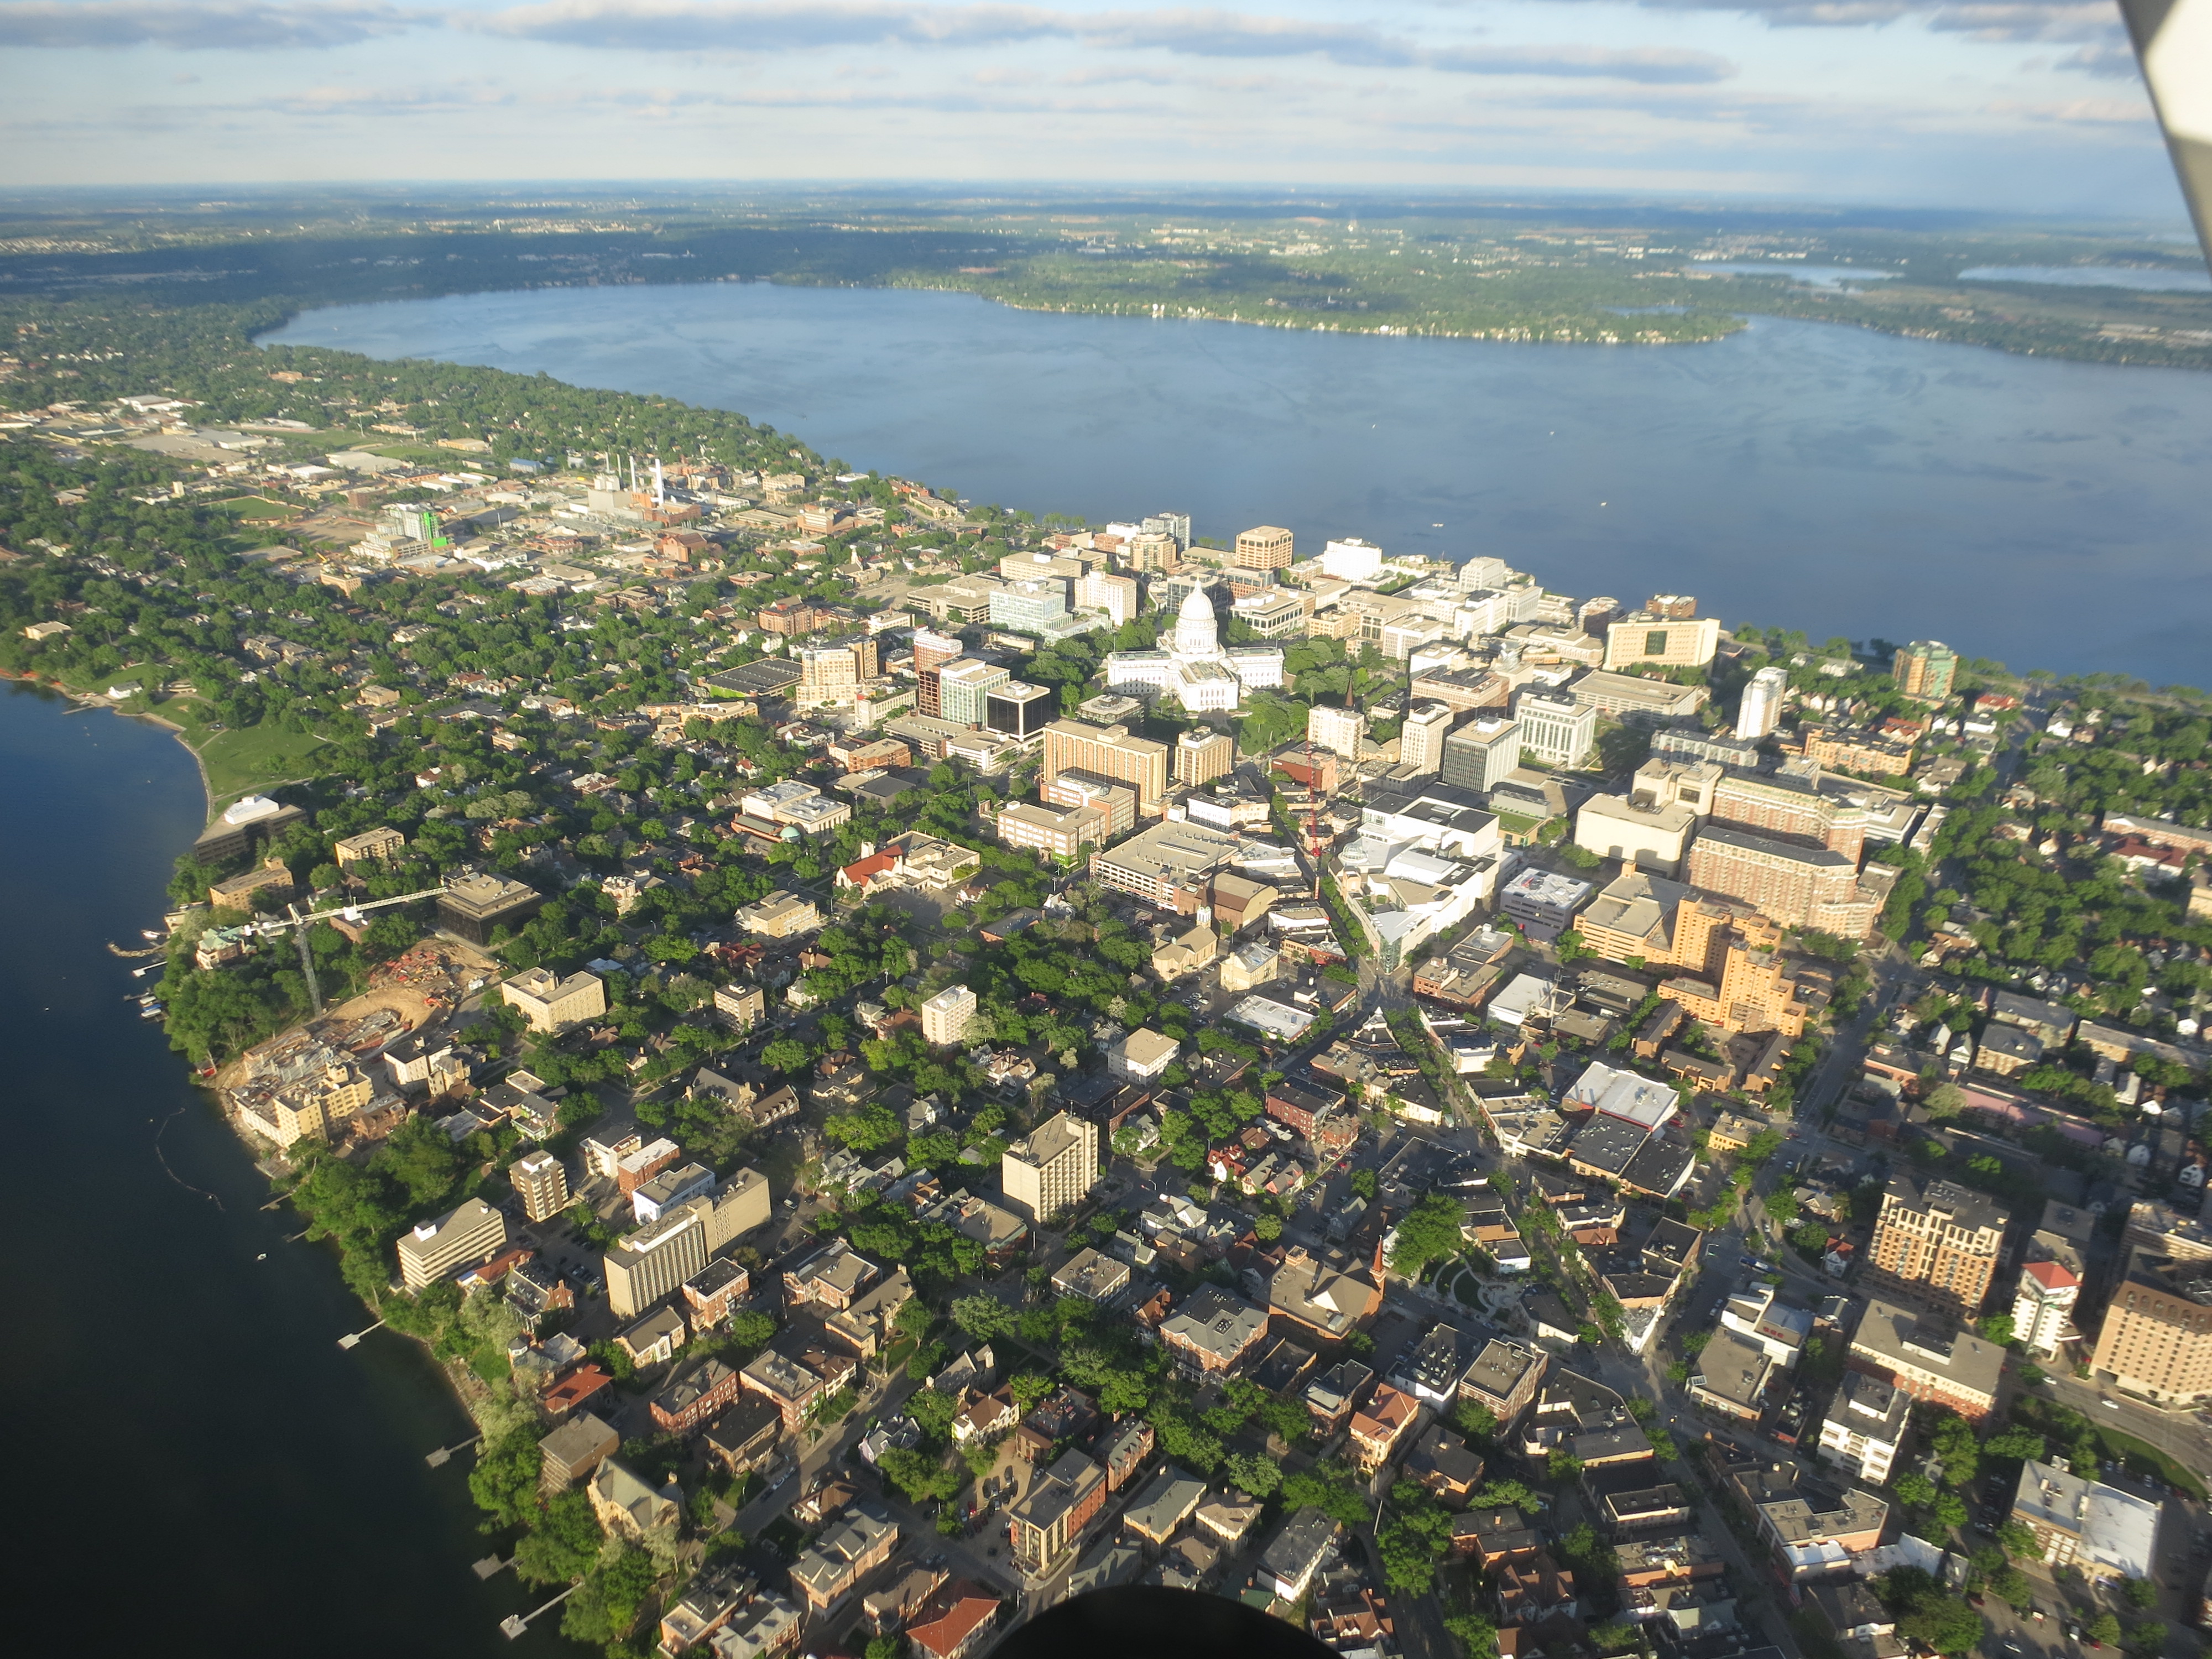 Aerial image of downtown Madison, Wisconsin